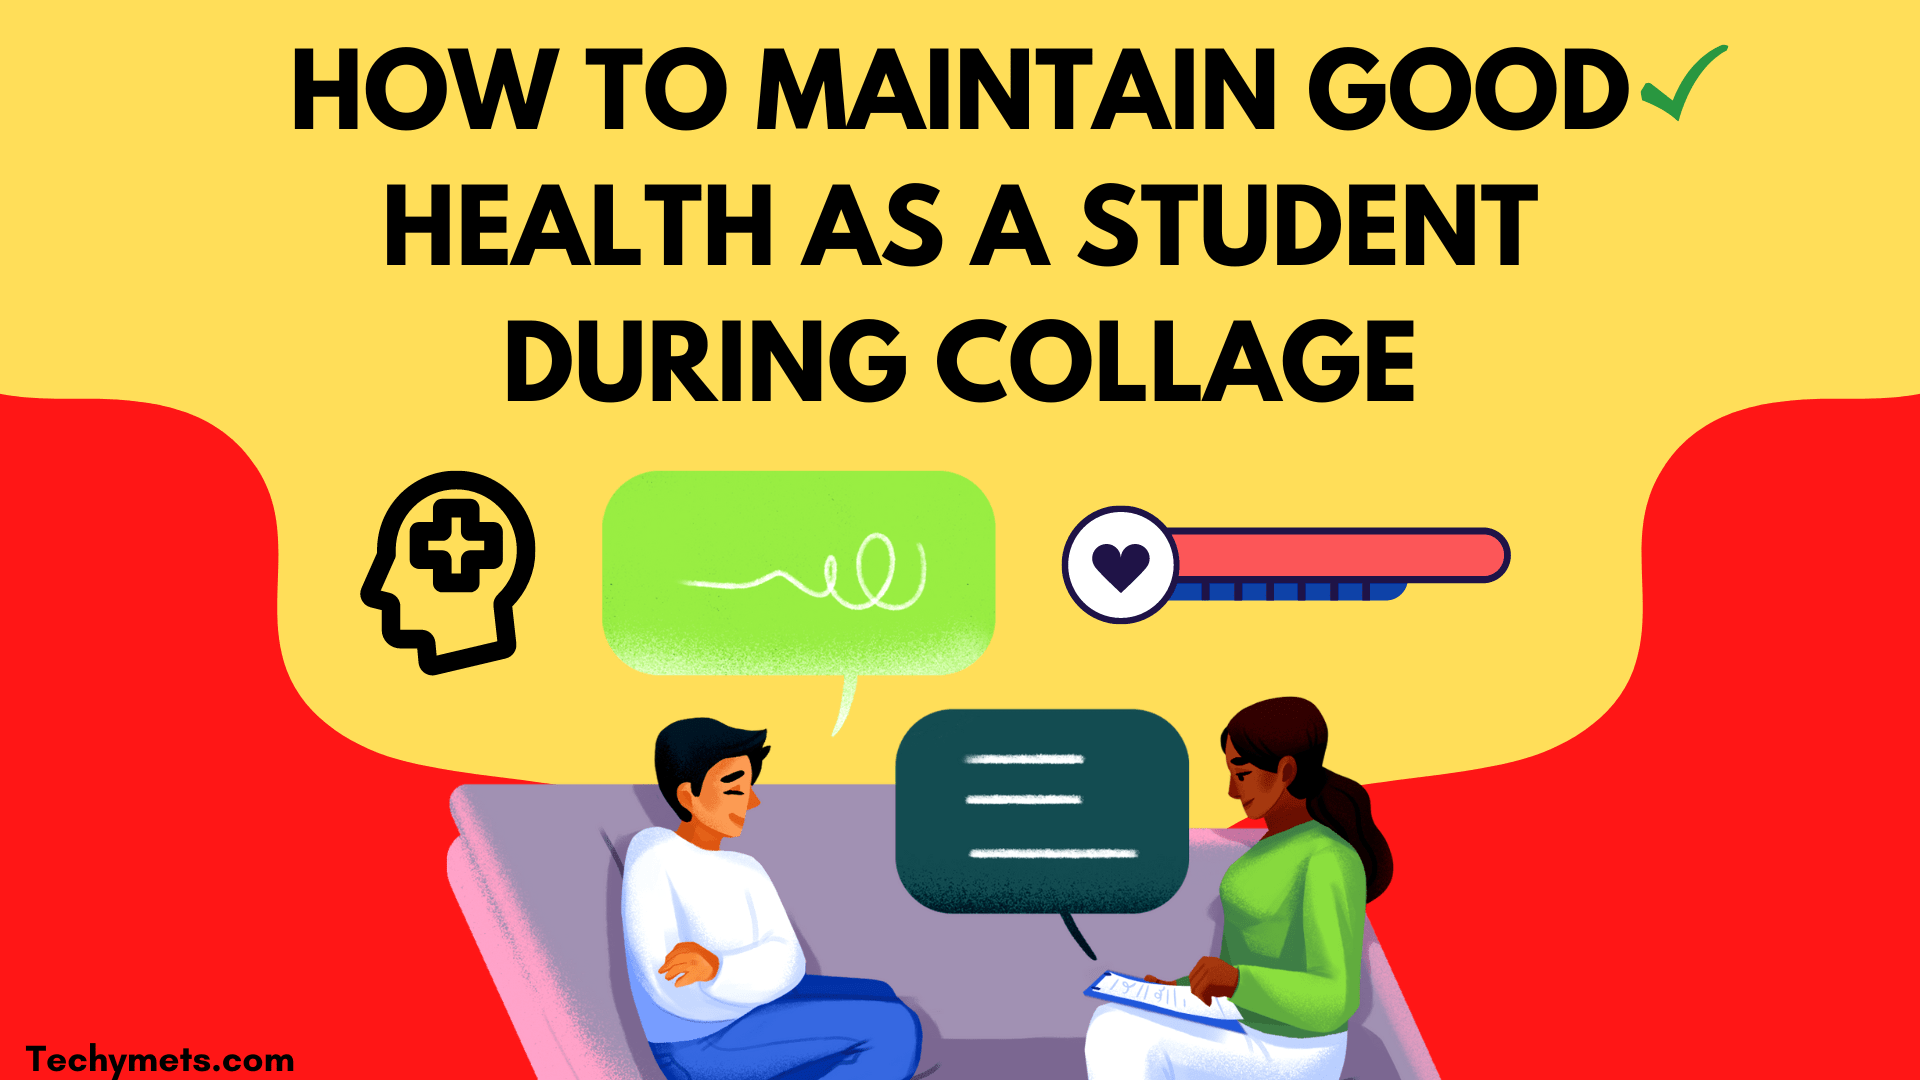 Good Health For Students